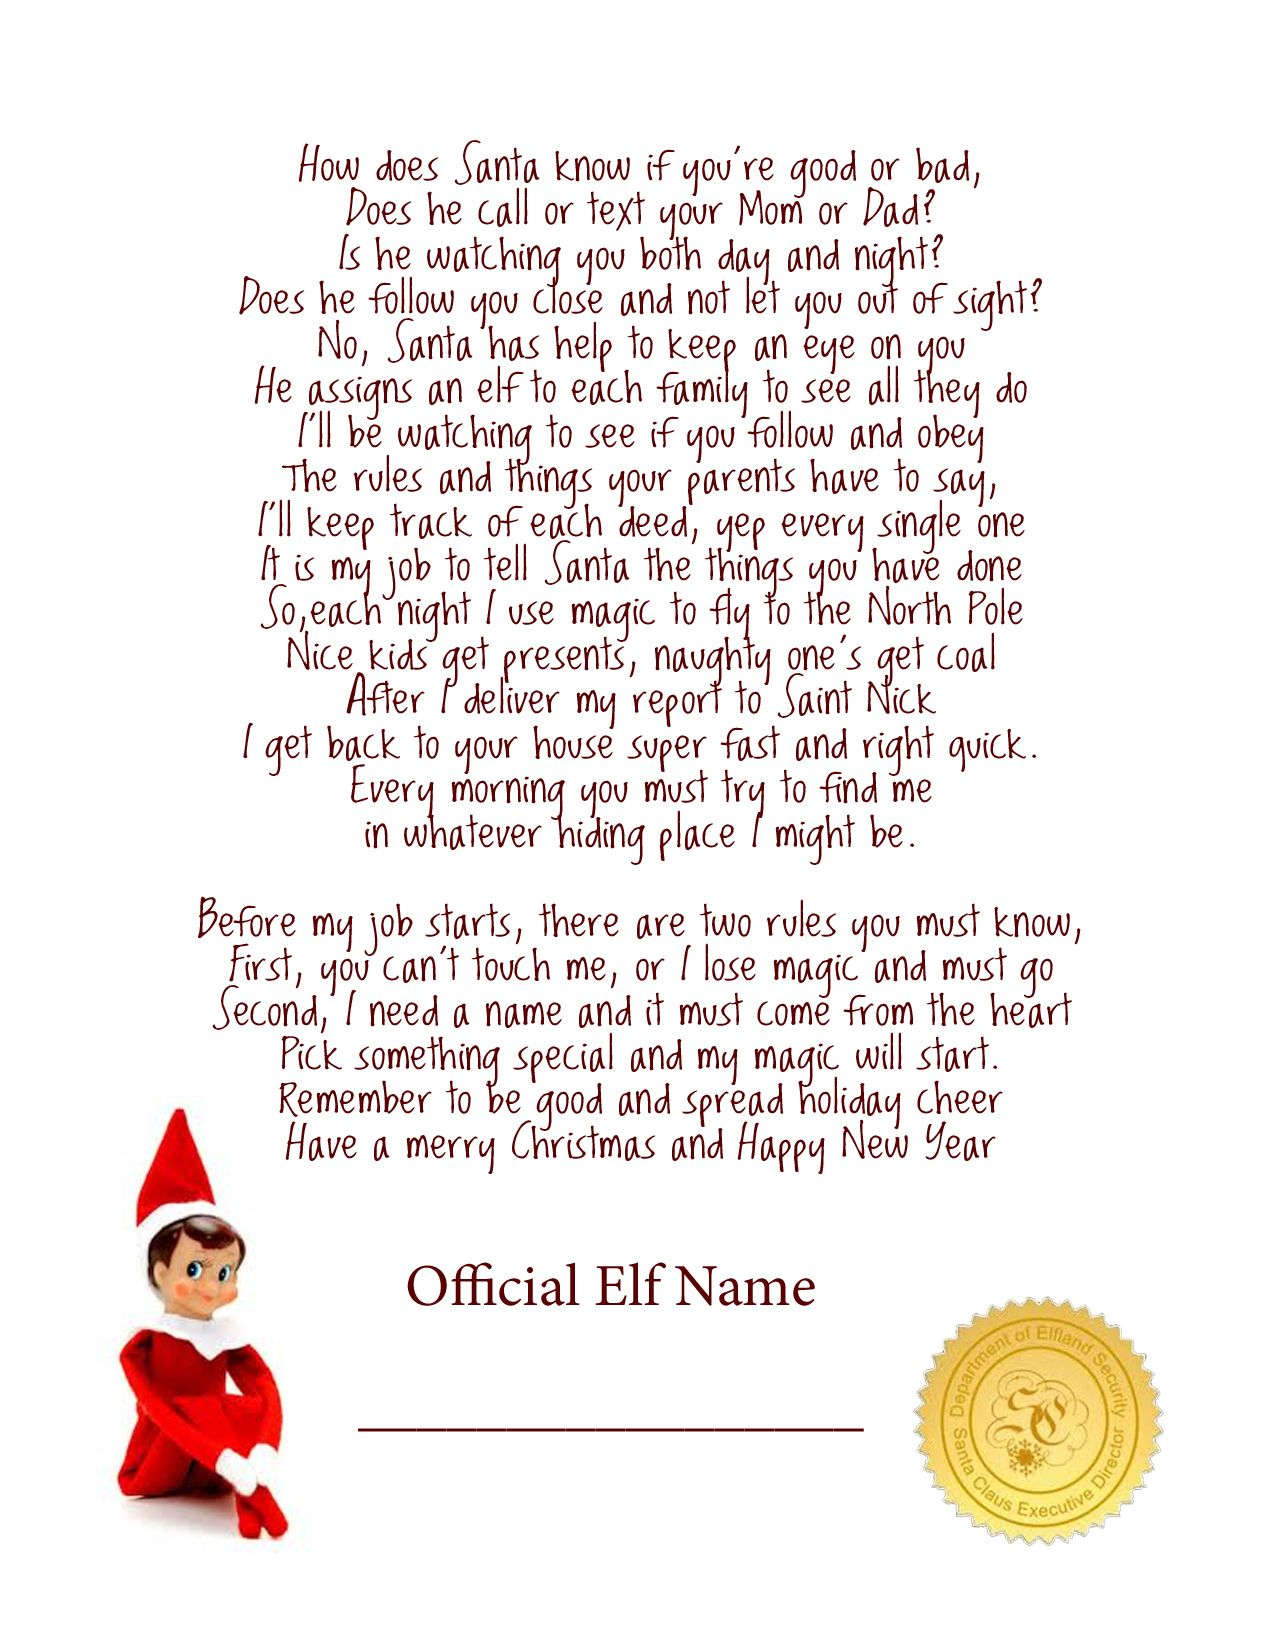 Elf On The Shelf Ideas For Arrival: 10 Free Printables | Elf On The - Free Printable Elf On The Shelf Letter